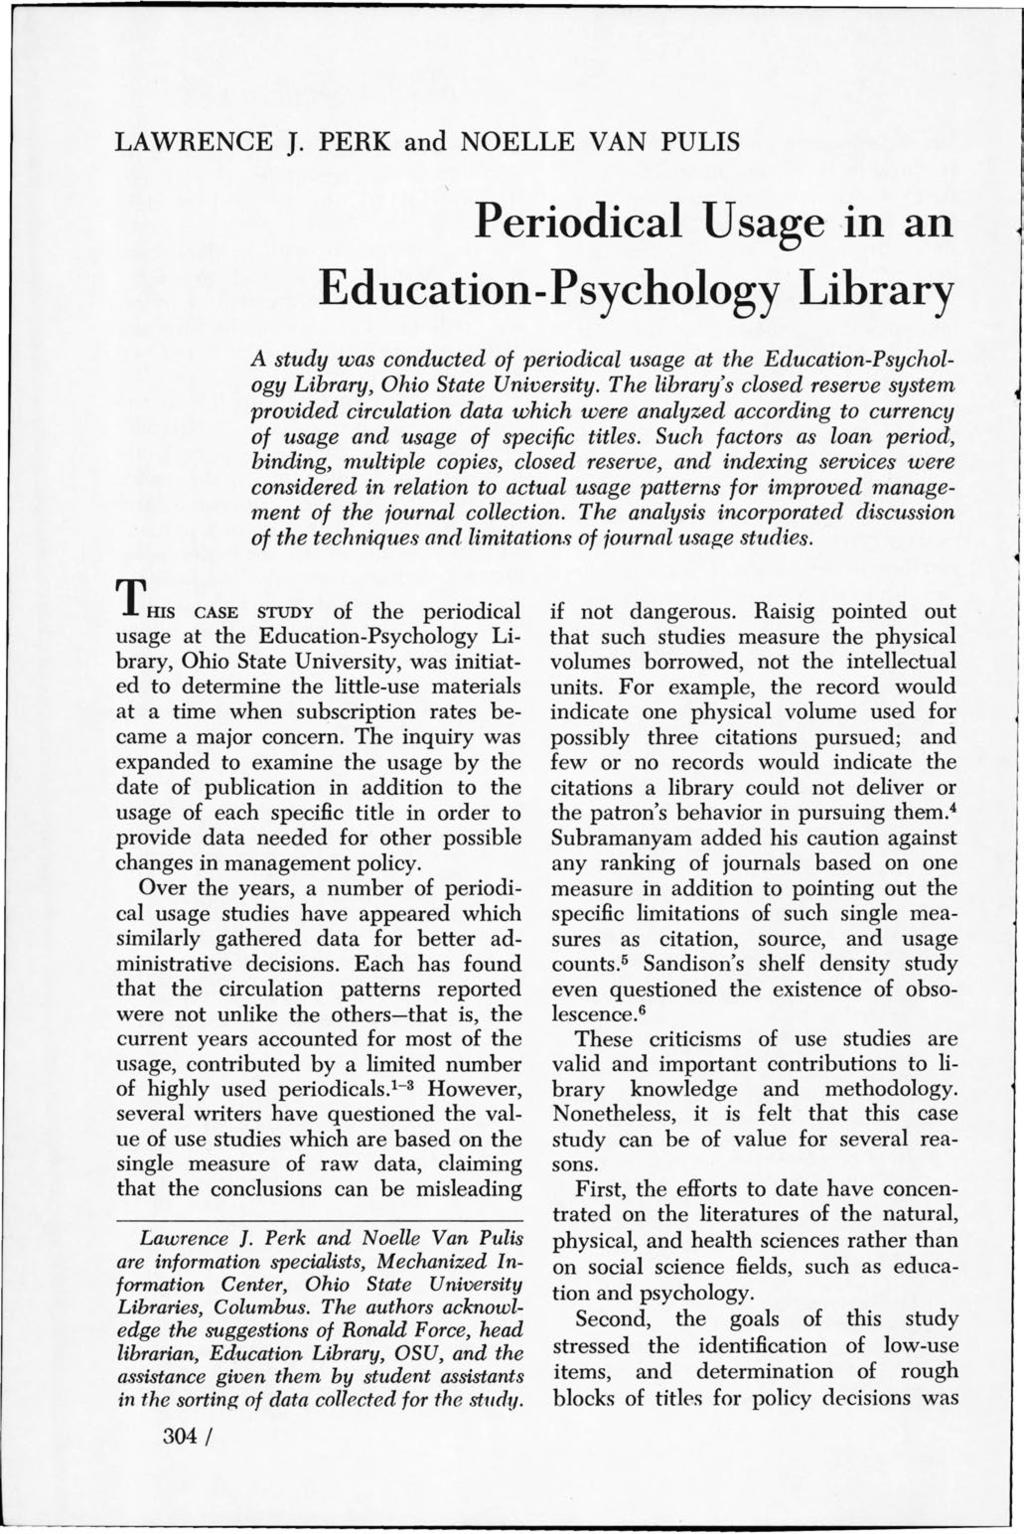 LAWRENCE J. PERK and NOELLE VAN PULIS Periodical Usage in an Education-Psychology Library A study was conducted of periodical usage at the Education-Psychology Library, Ohio State University.